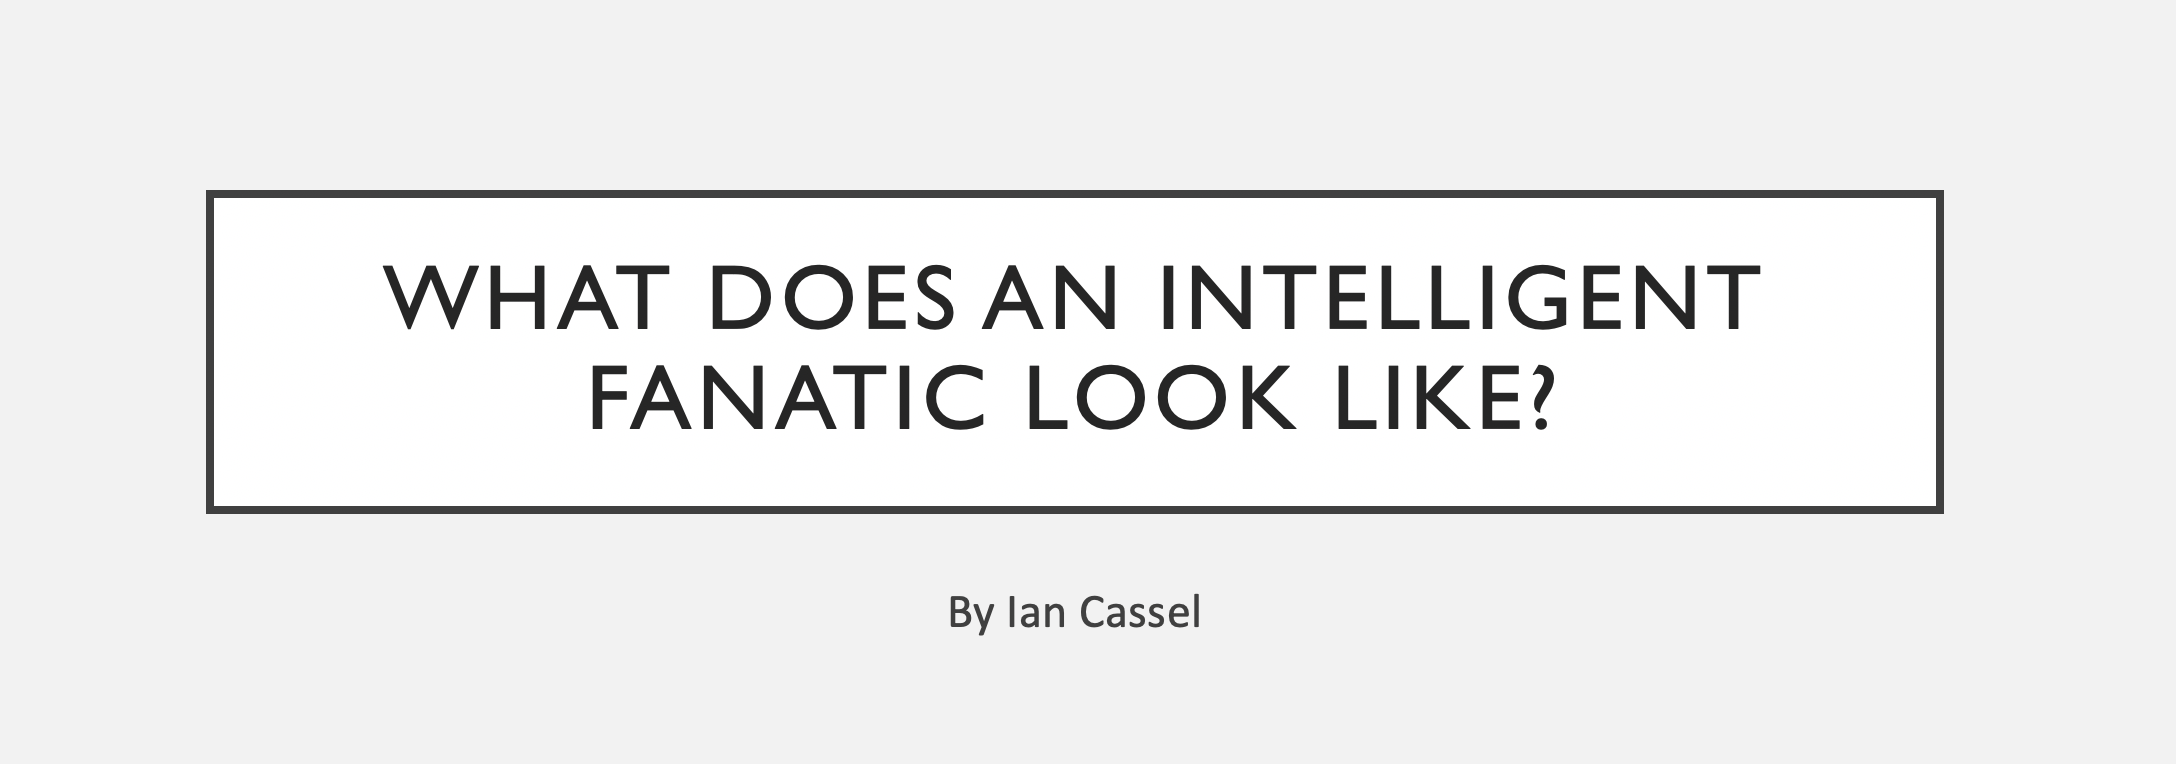 [Presentation] What Does An Intelligent Fanatic Look Like?